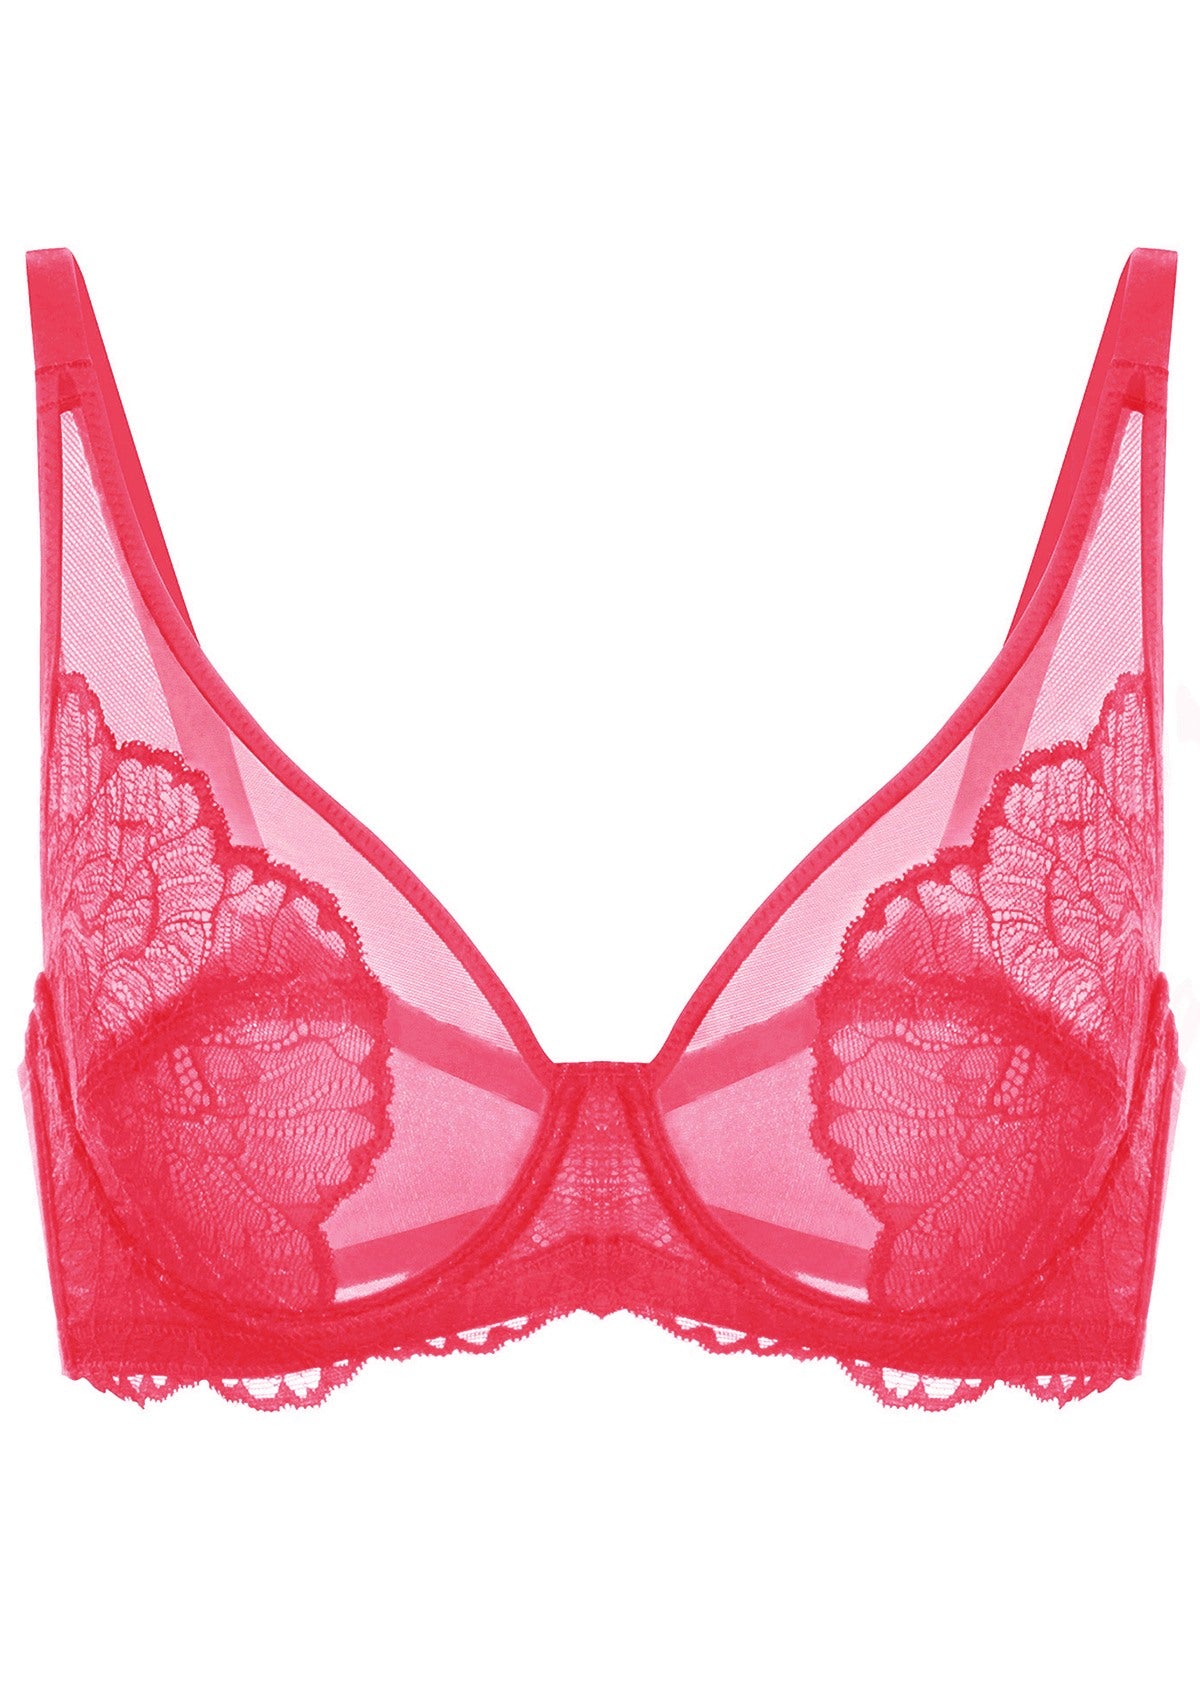 HSIA Blossom Unlined Lace Underwire Bra - Burgundy / 40 / C